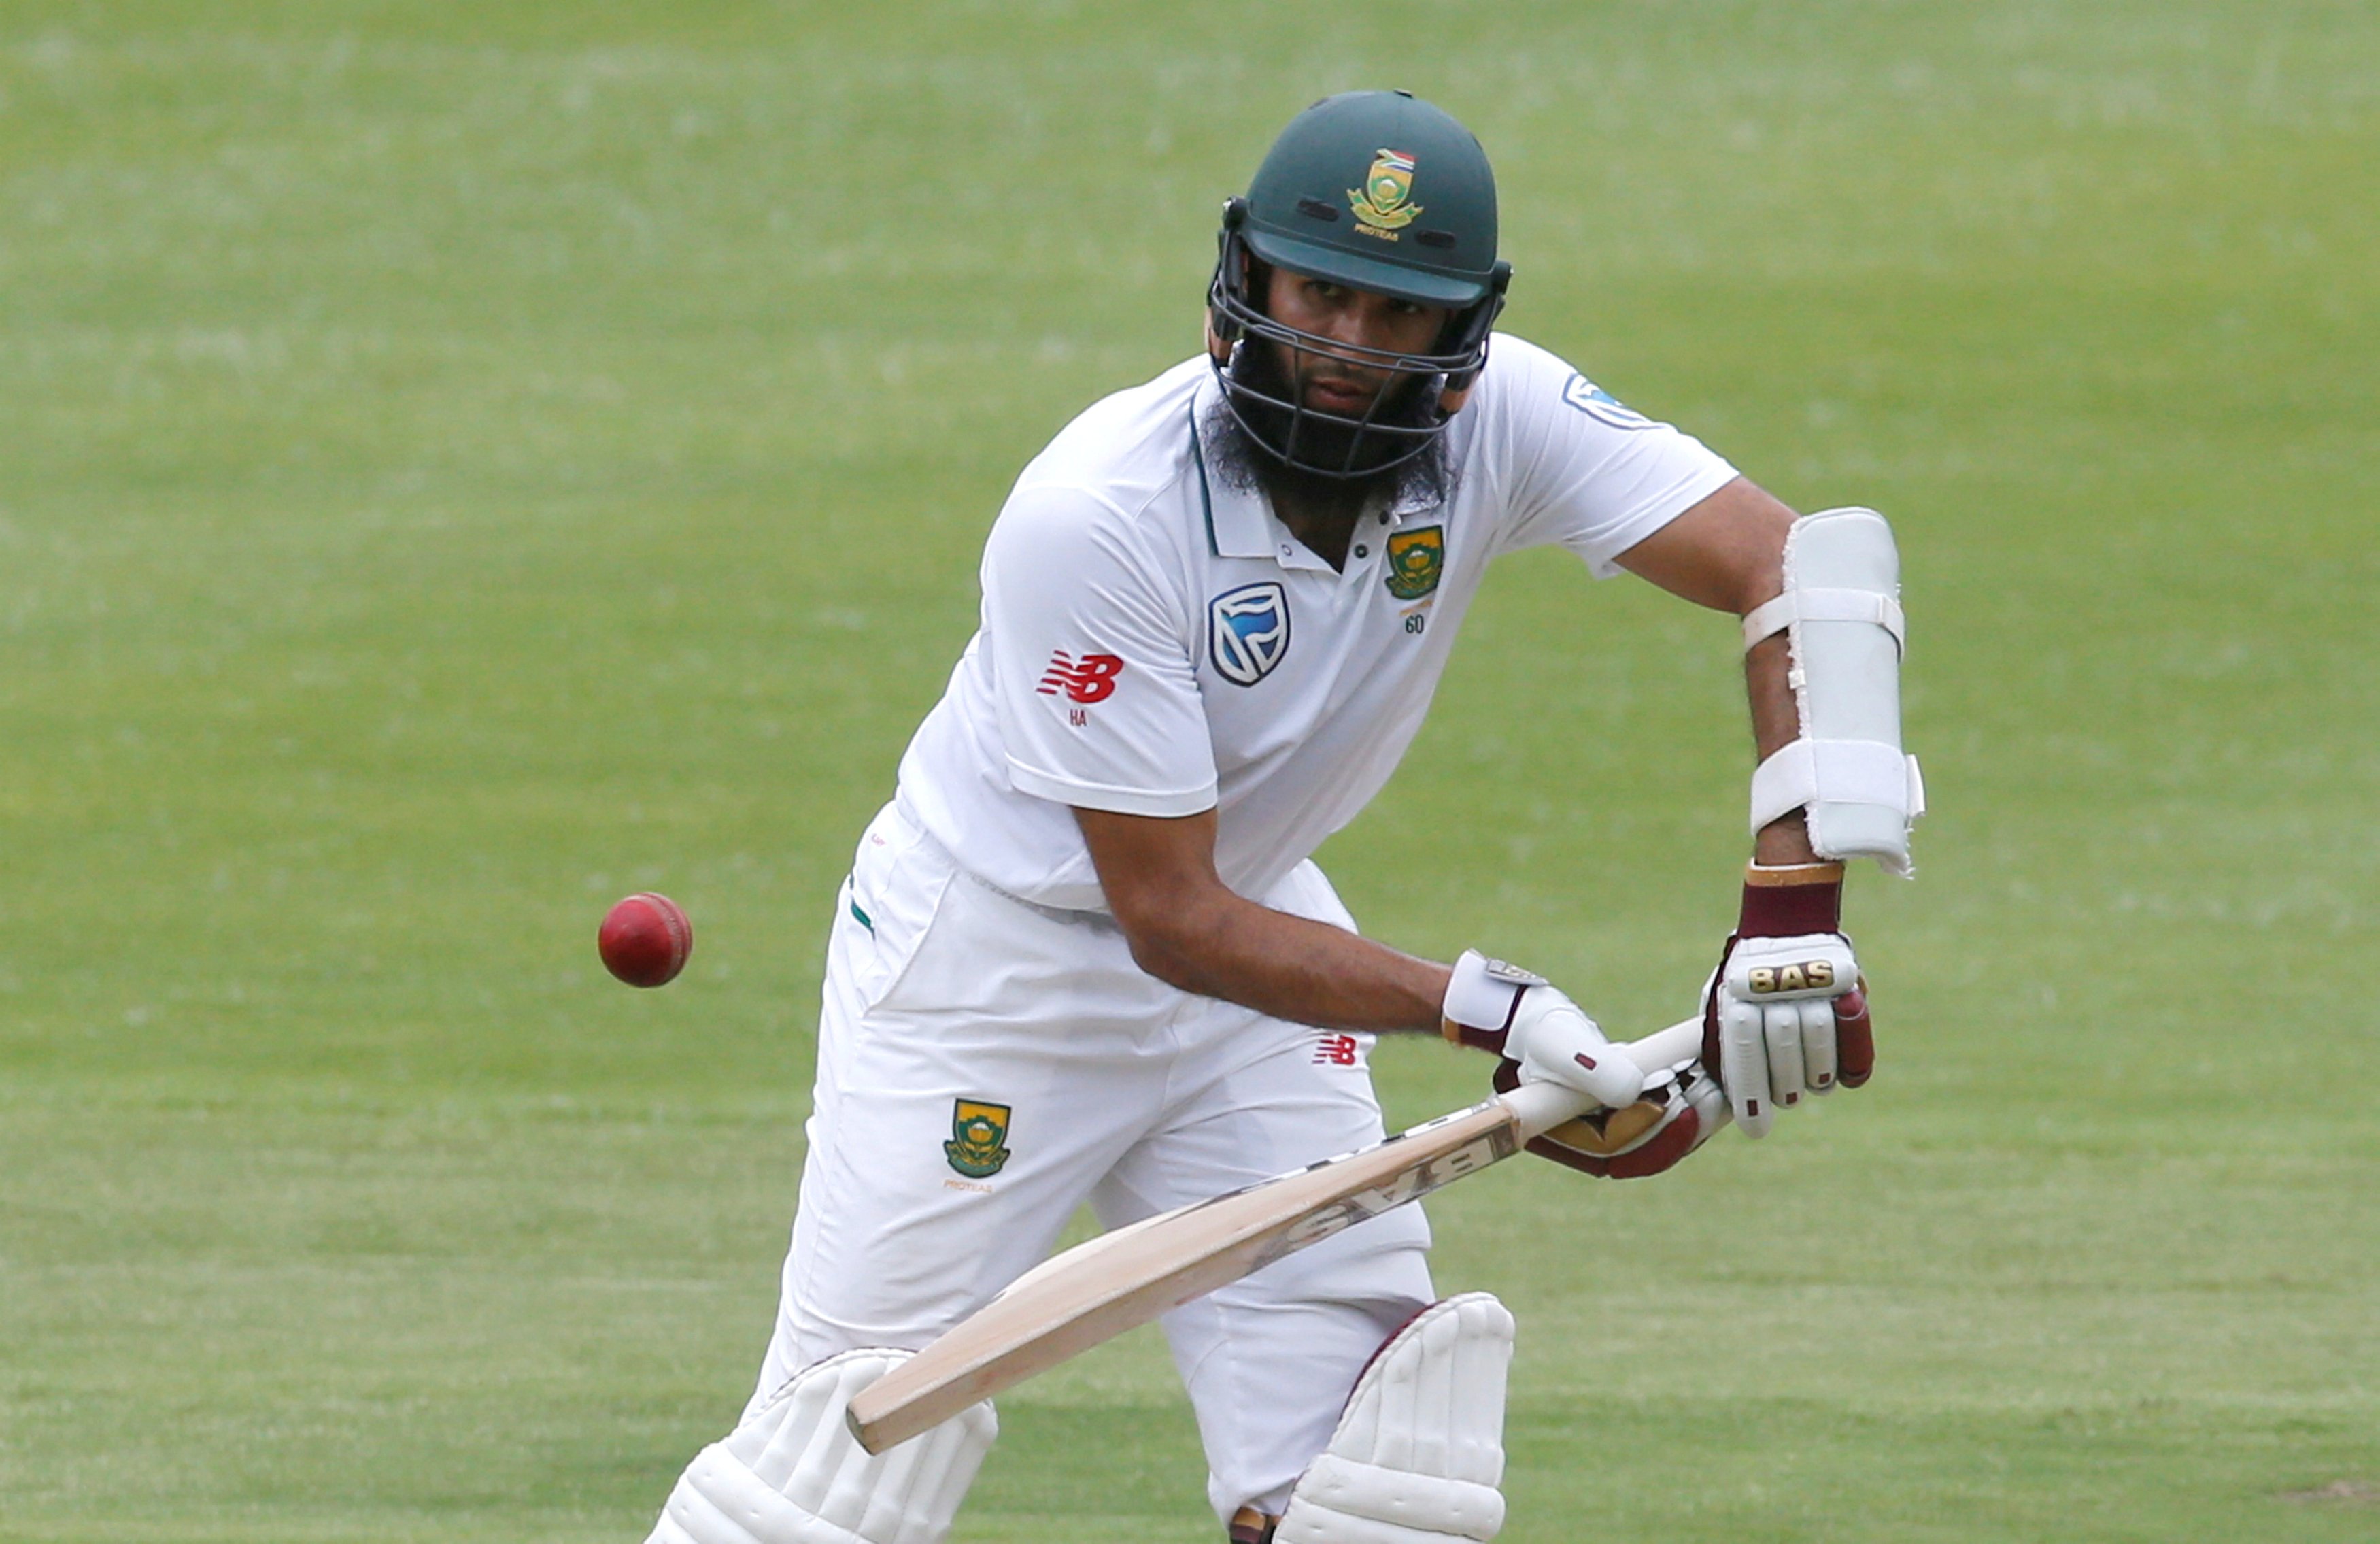 Hashim Amla | Most ducks scored in tests batting at number 3 | SportzPoint.com